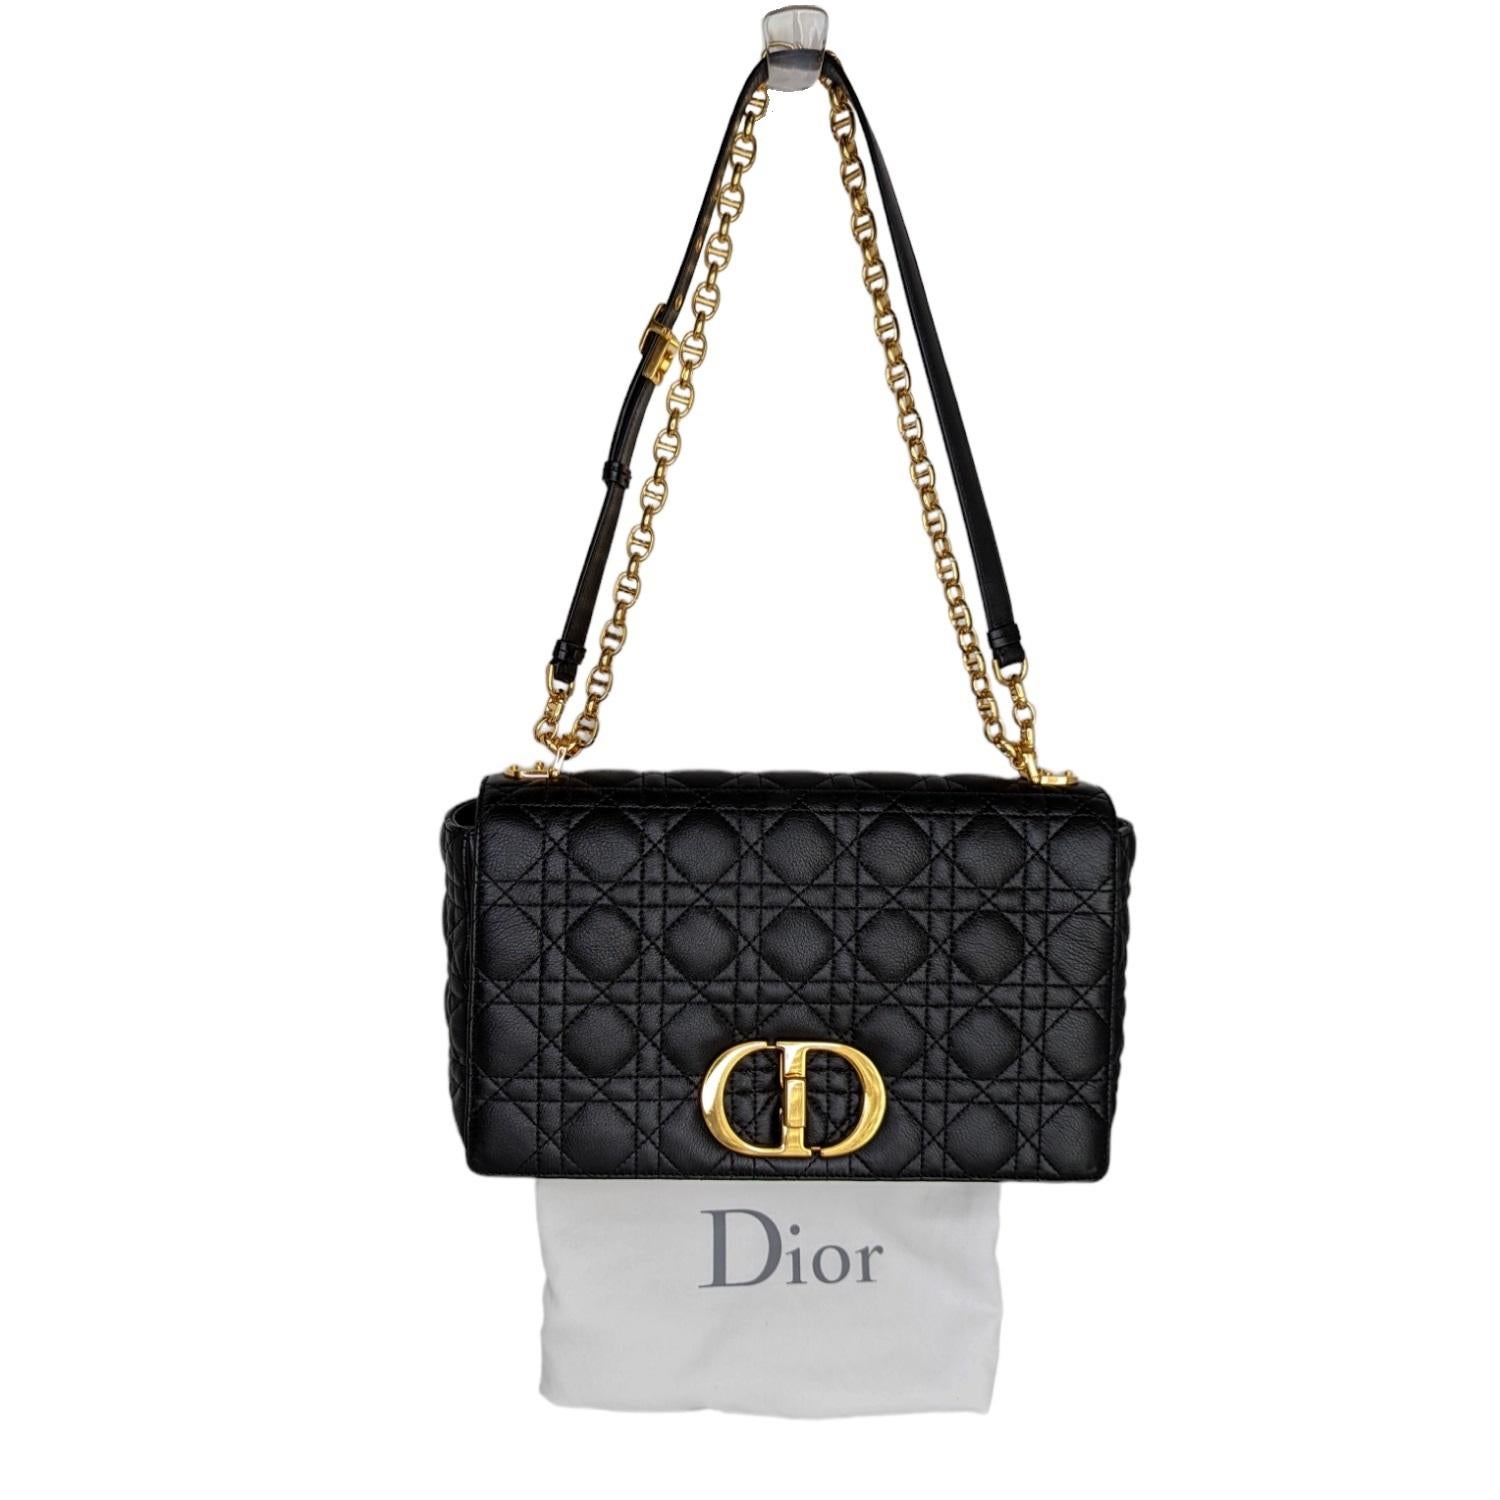 The Dior Caro bag combines modernity with timeless elegance. The design is crafted in black supple calfskin with Cannage stitching. The bag features a flap adorned with an antique gold-finish metal 'CD' twist clasp, inspired by the seal of a